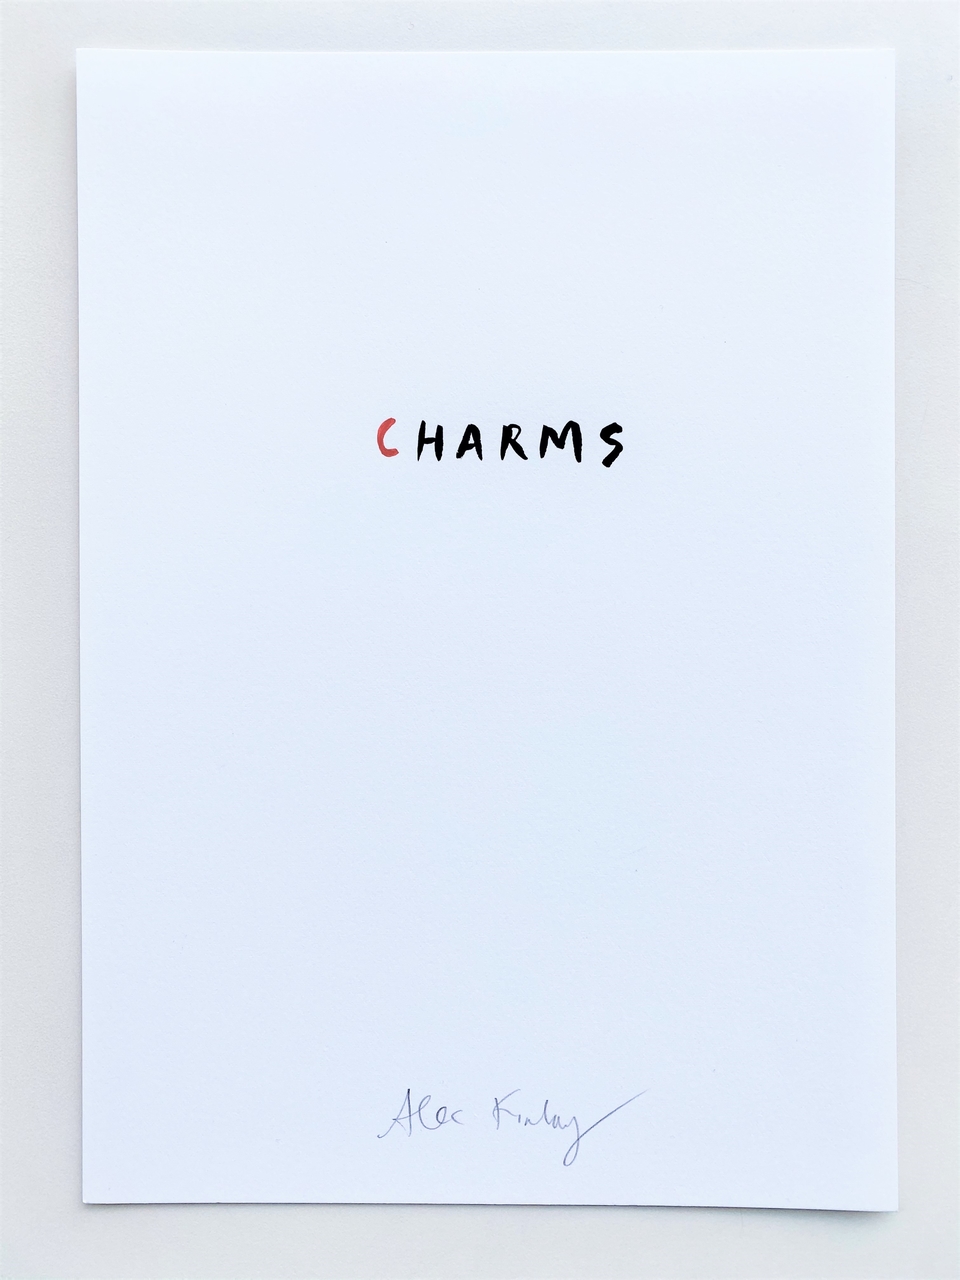 Untitled (Charms), 2020